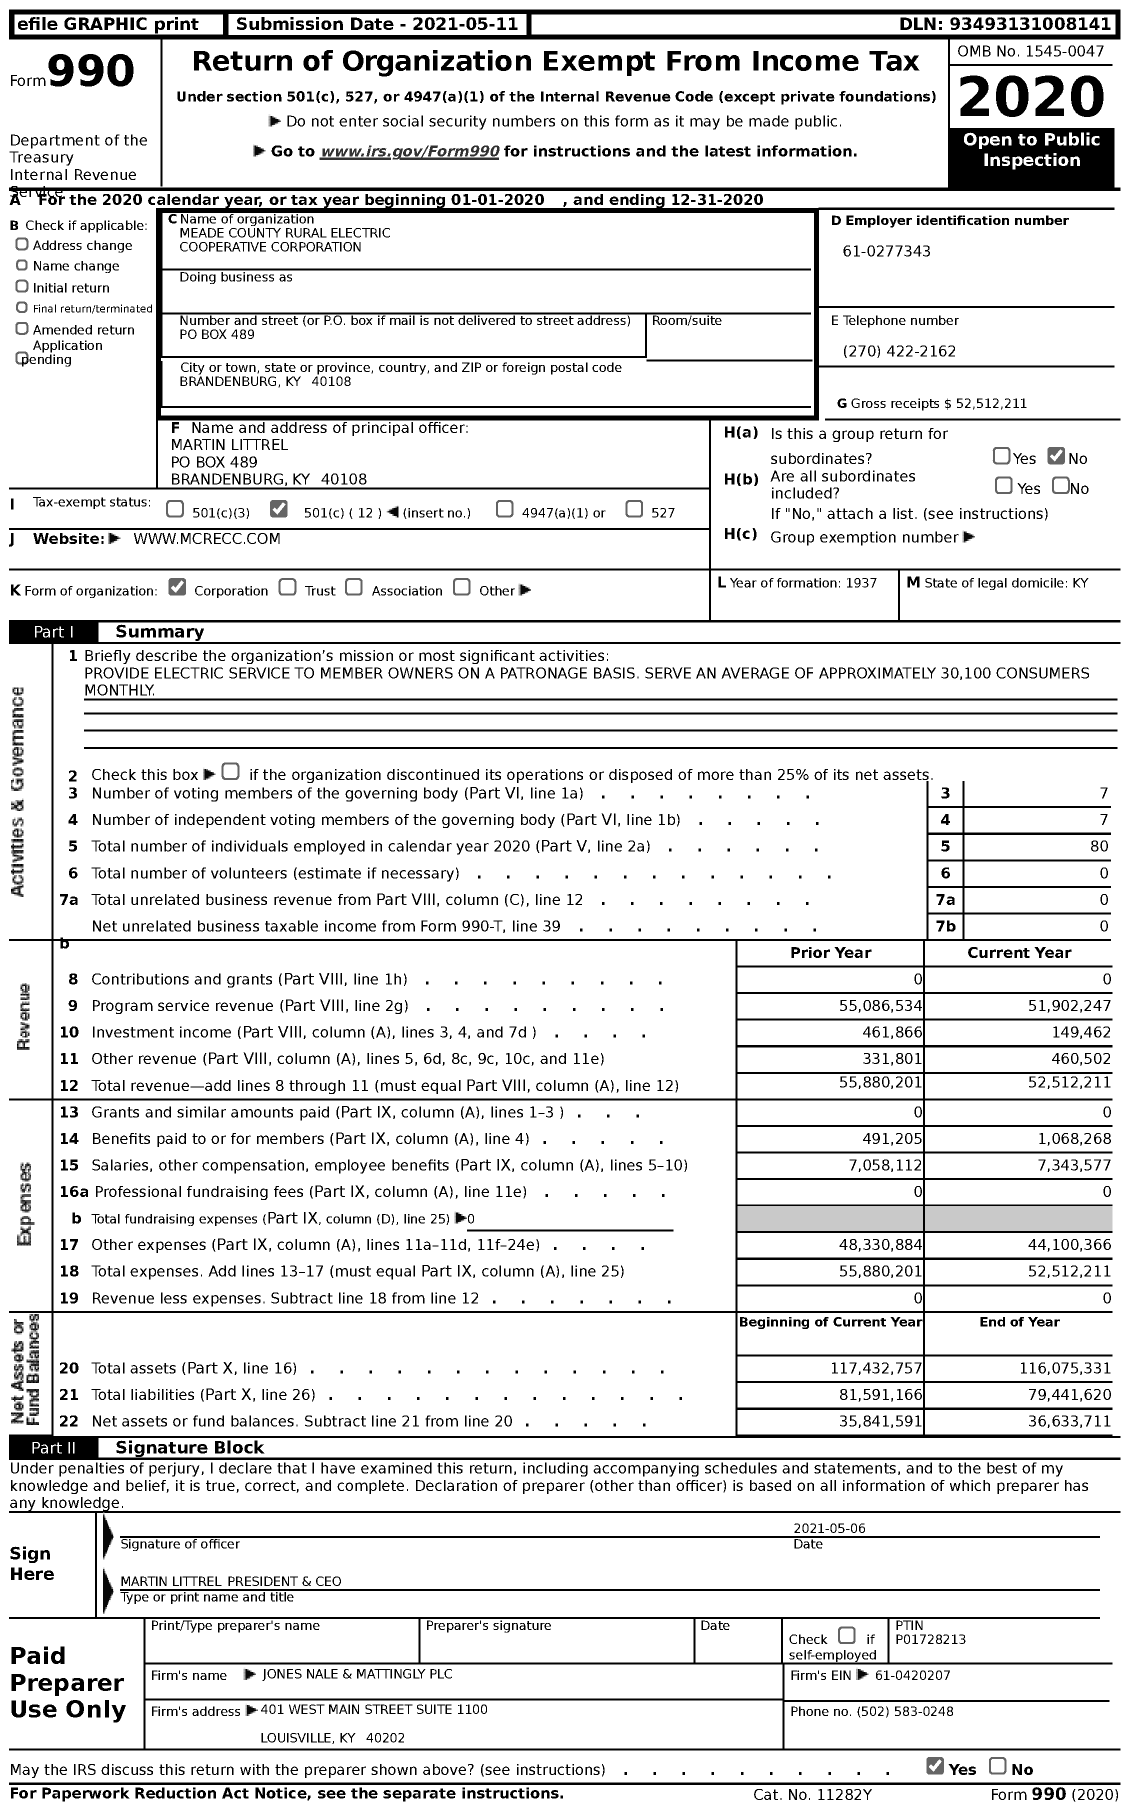 Image of first page of 2020 Form 990 for Meade County Rural Electric Cooperative Corporation